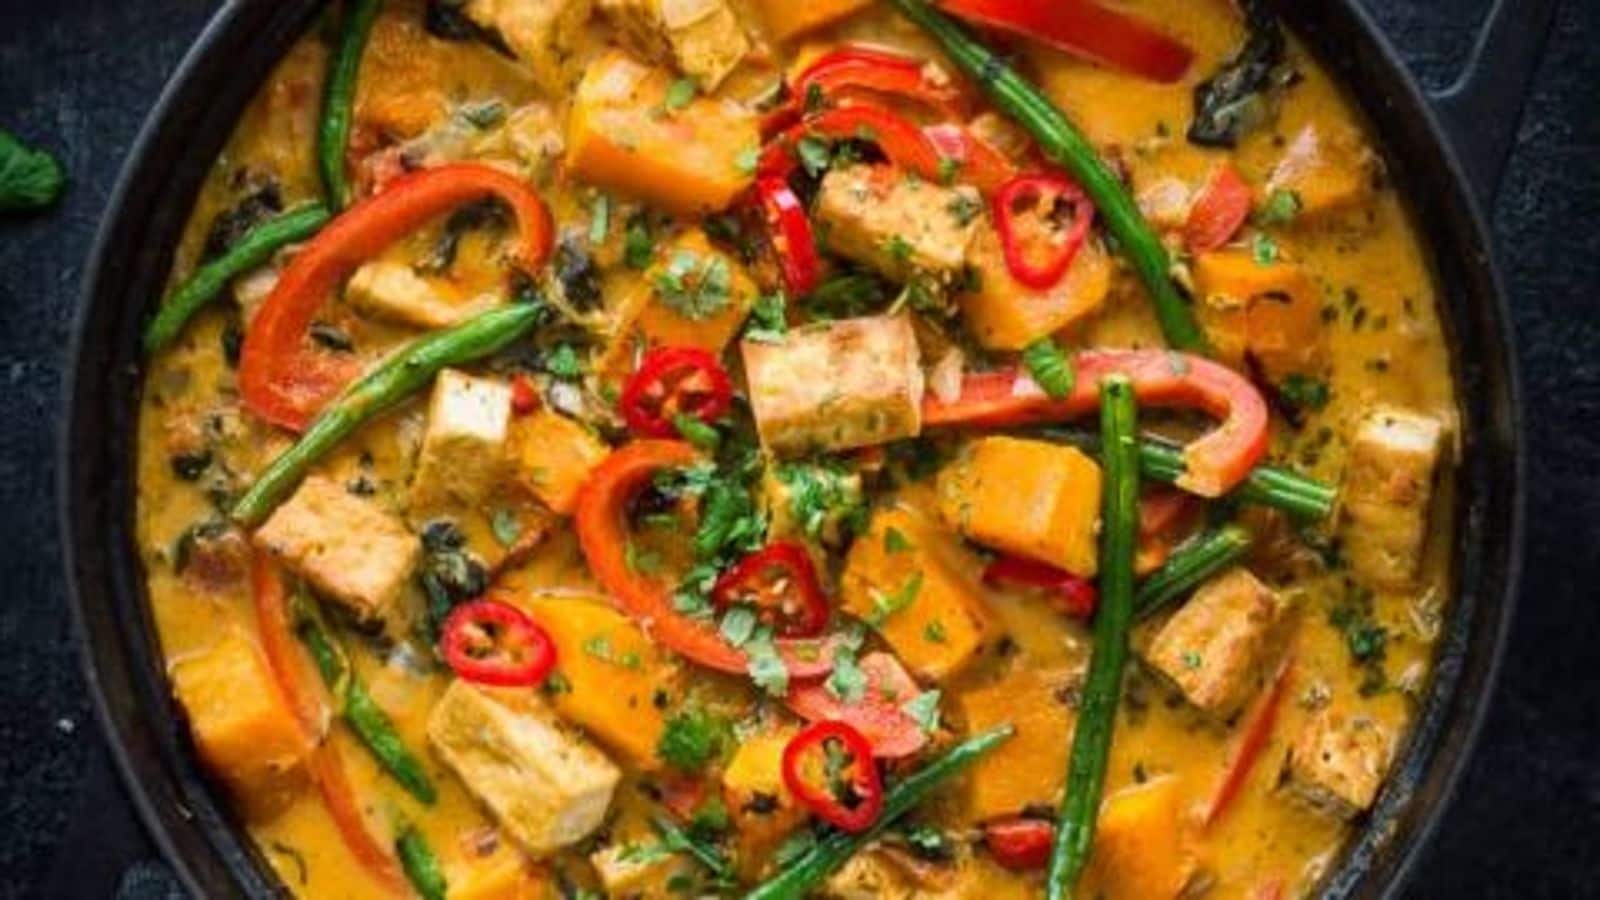 Try this Brazilian moqueca with plantains recipe